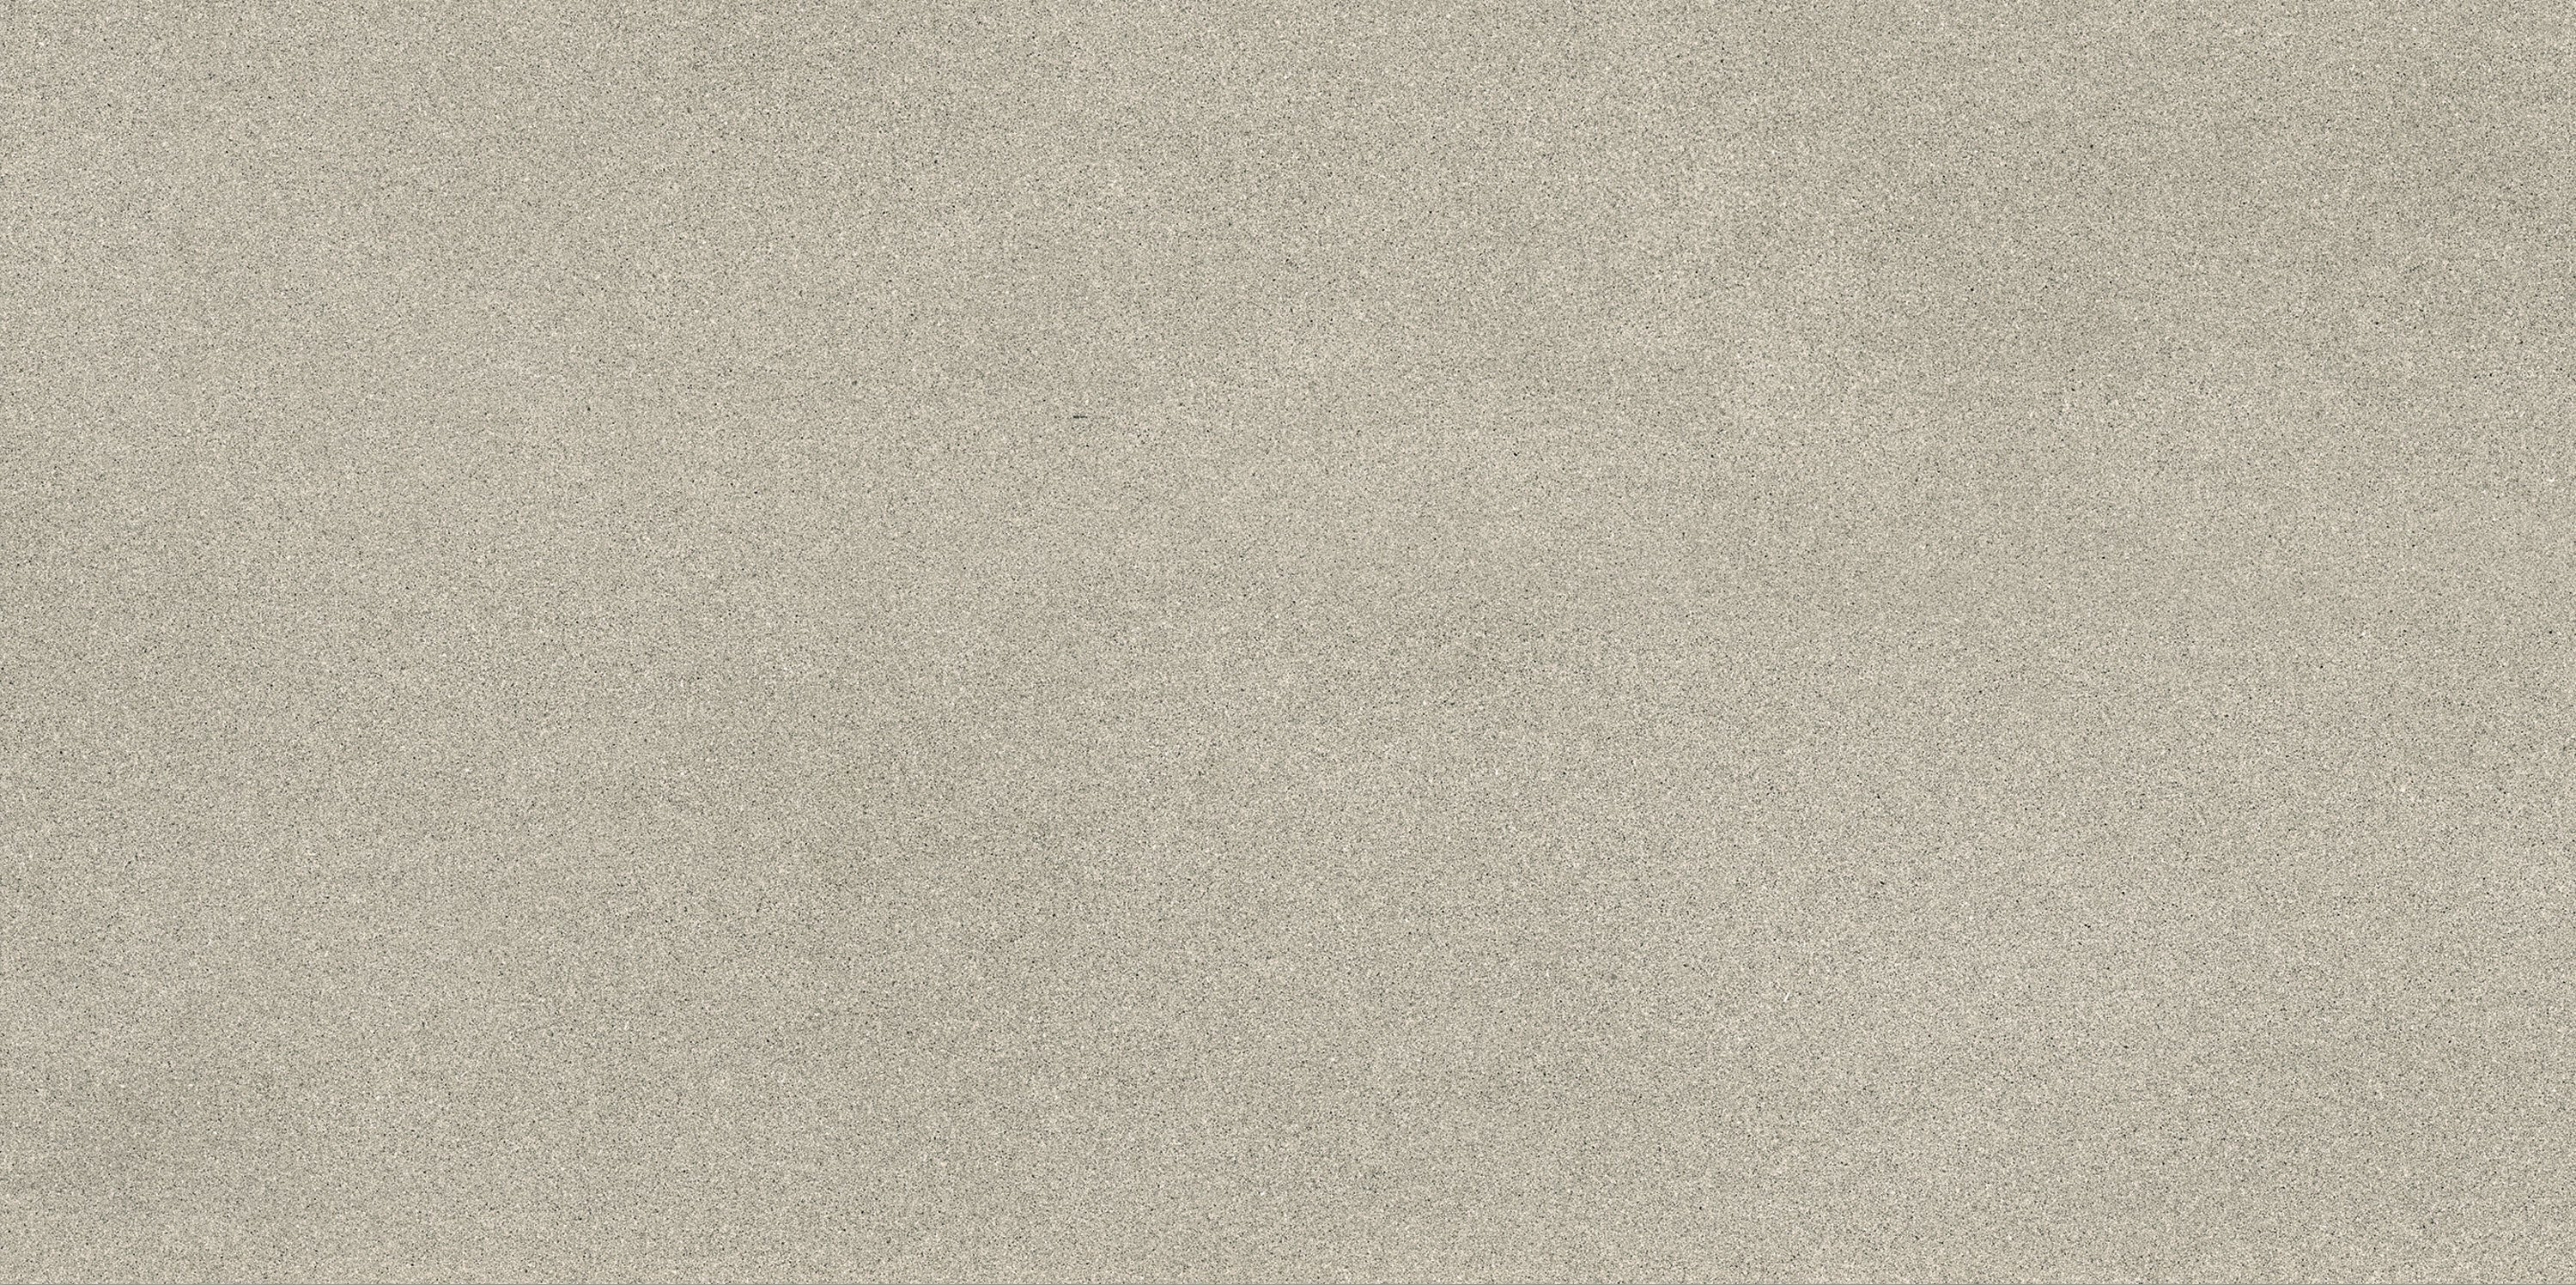 landmark frontier20 sedimentary artistic beige paver tile 12x24x20mm matte rectified porcelain tile distributed by surface group international